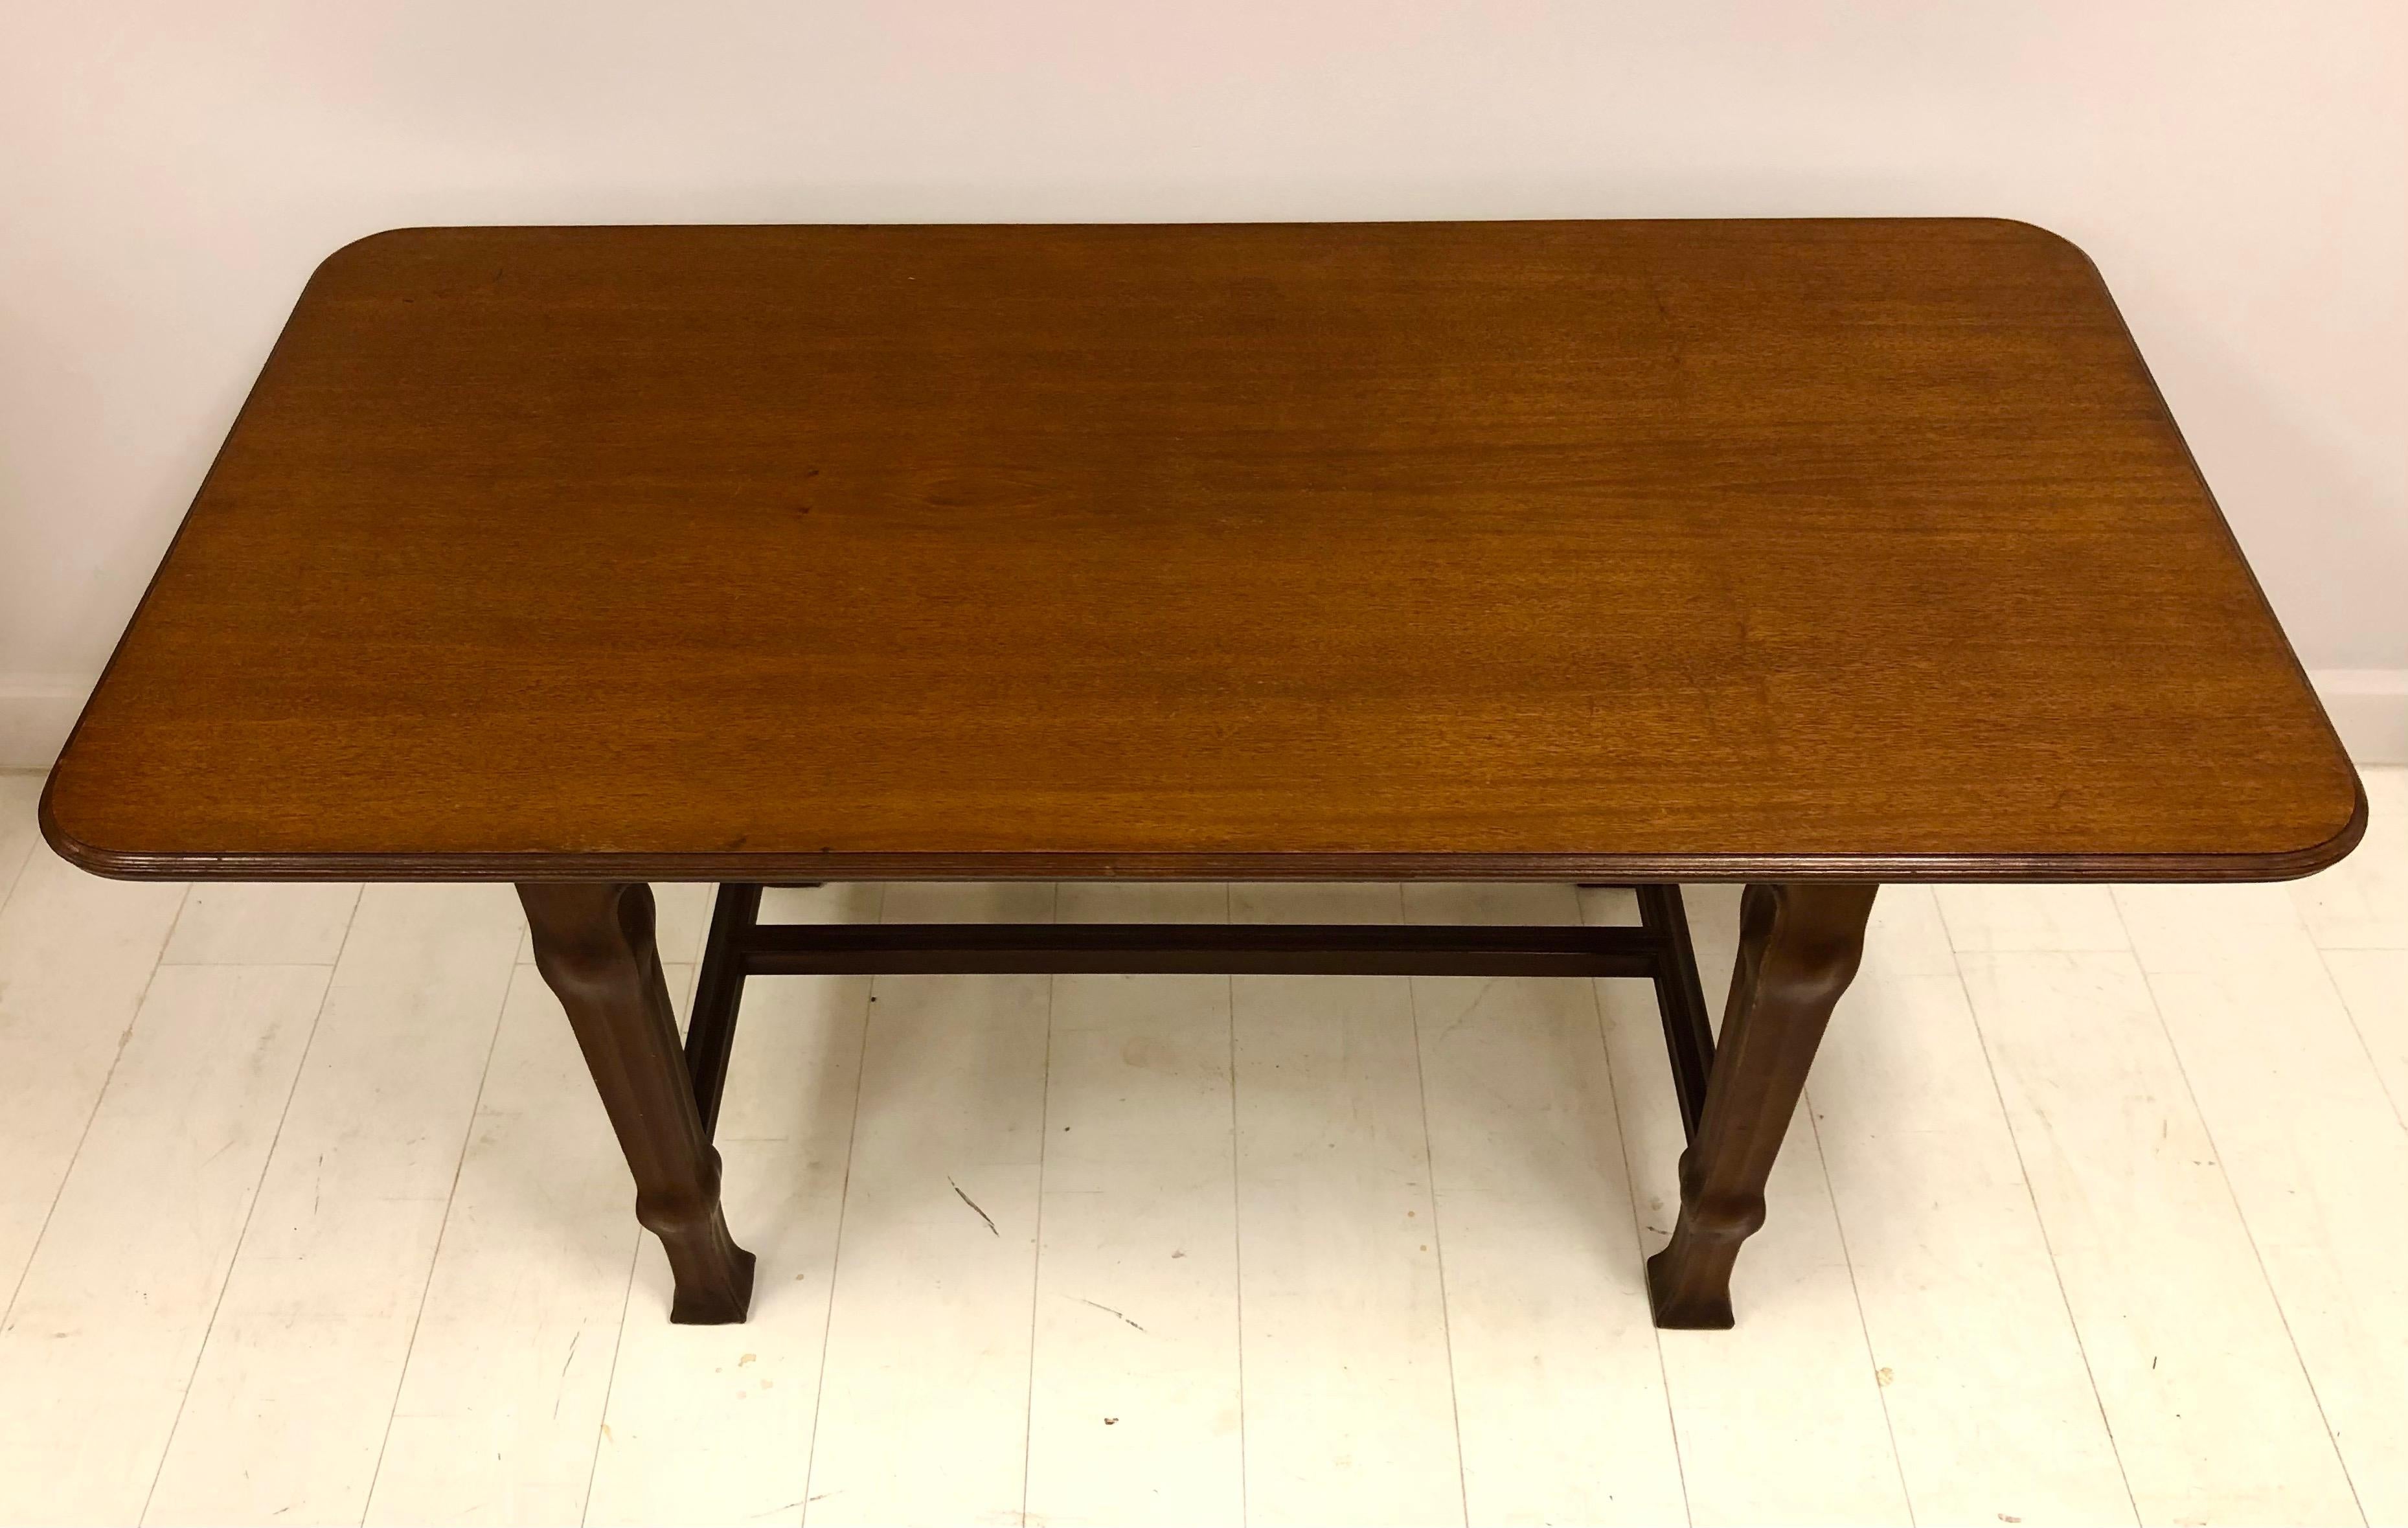 20th Century Ferdinand Boberg, Swedish Art Nouveau Library or Dining Table For Sale